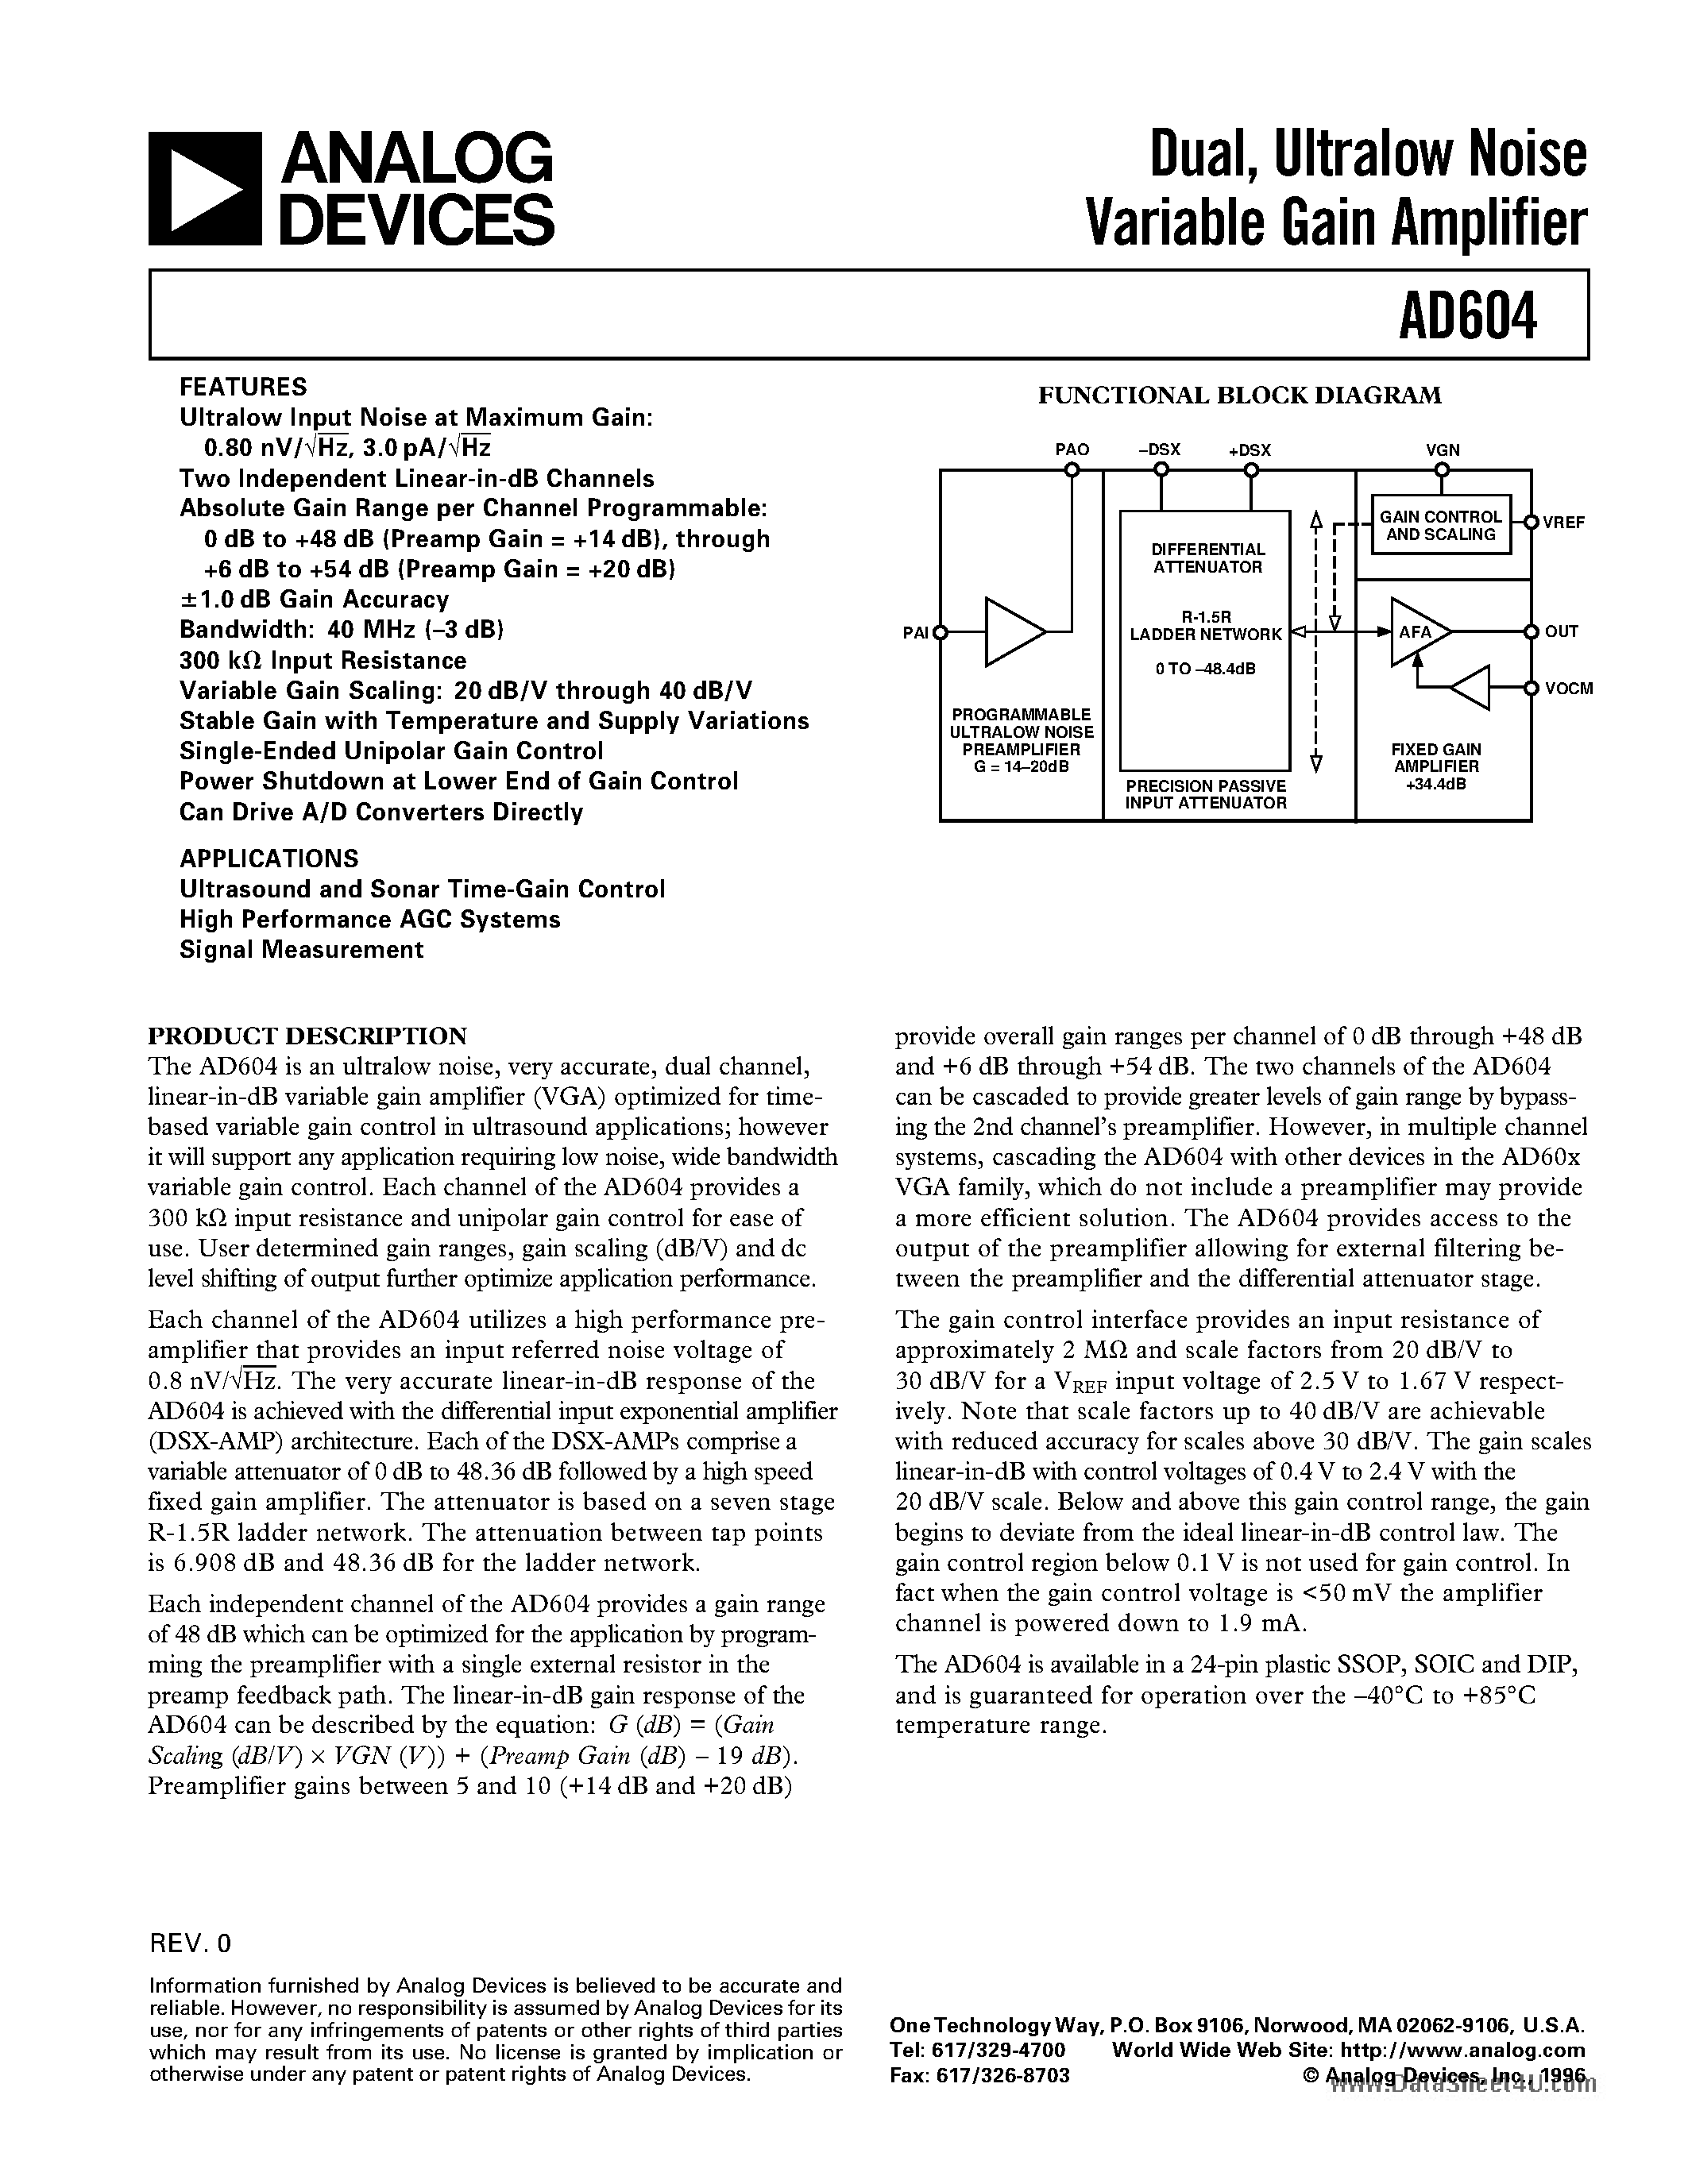 Datasheet AD604ARS - Dual/ Ultralow Noise Variable Gain Amplifier page 1